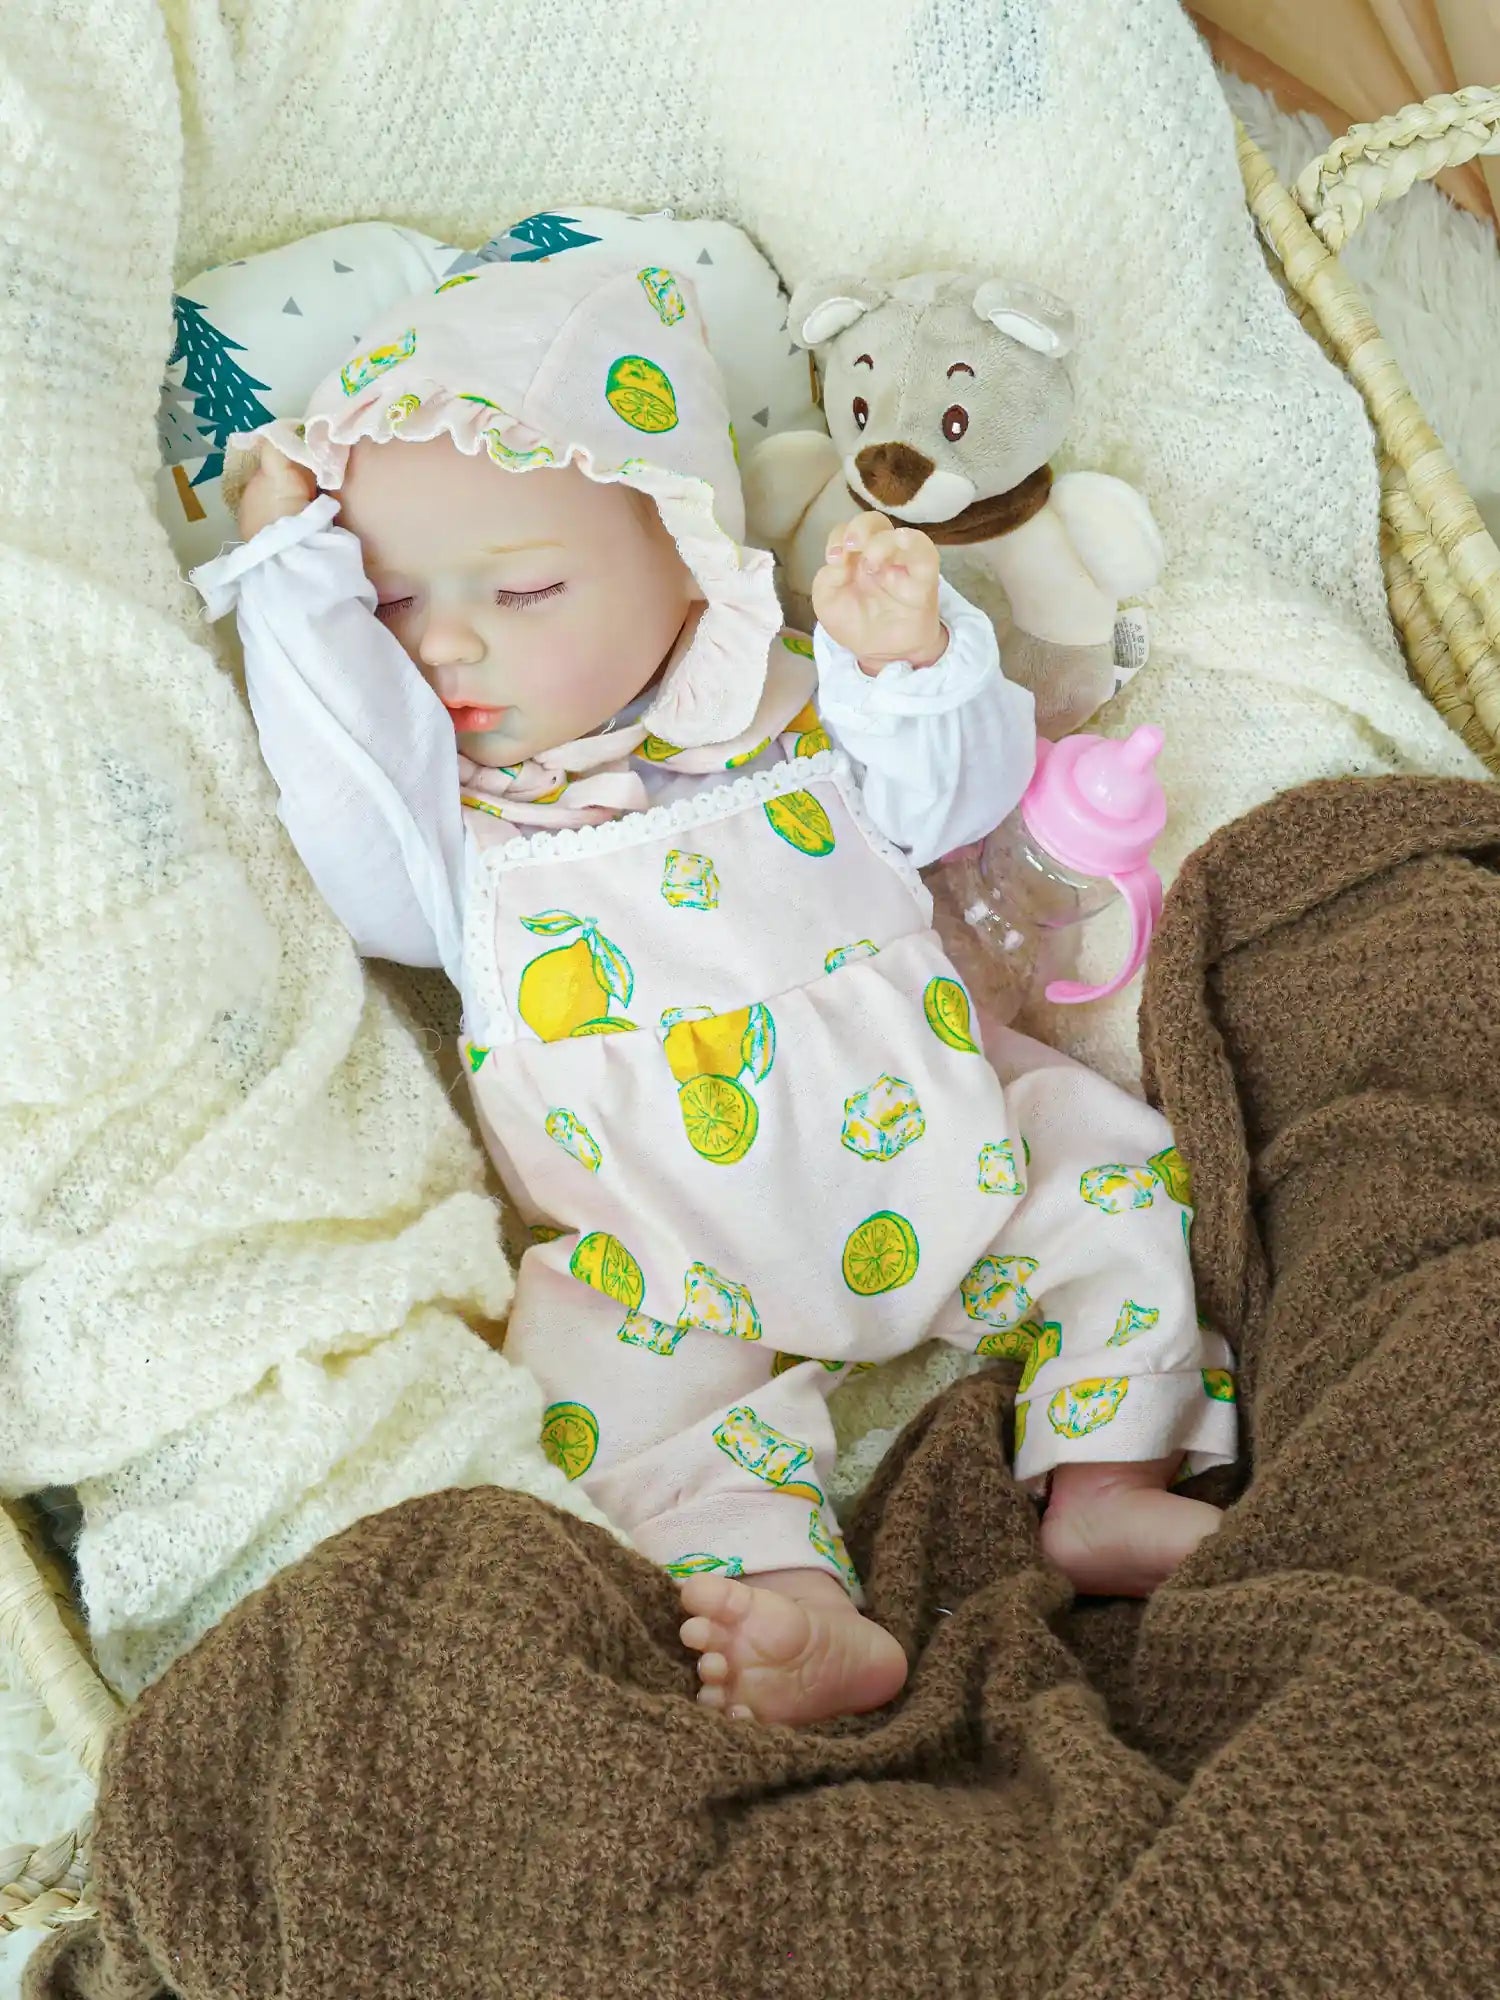 Close-up of a reborn baby doll in a pink lemon-print bonnet and outfit, resting in a cozy basket. The doll is surrounded by soft white and brown blankets, accompanied by a plush teddy bear and a baby bottle.